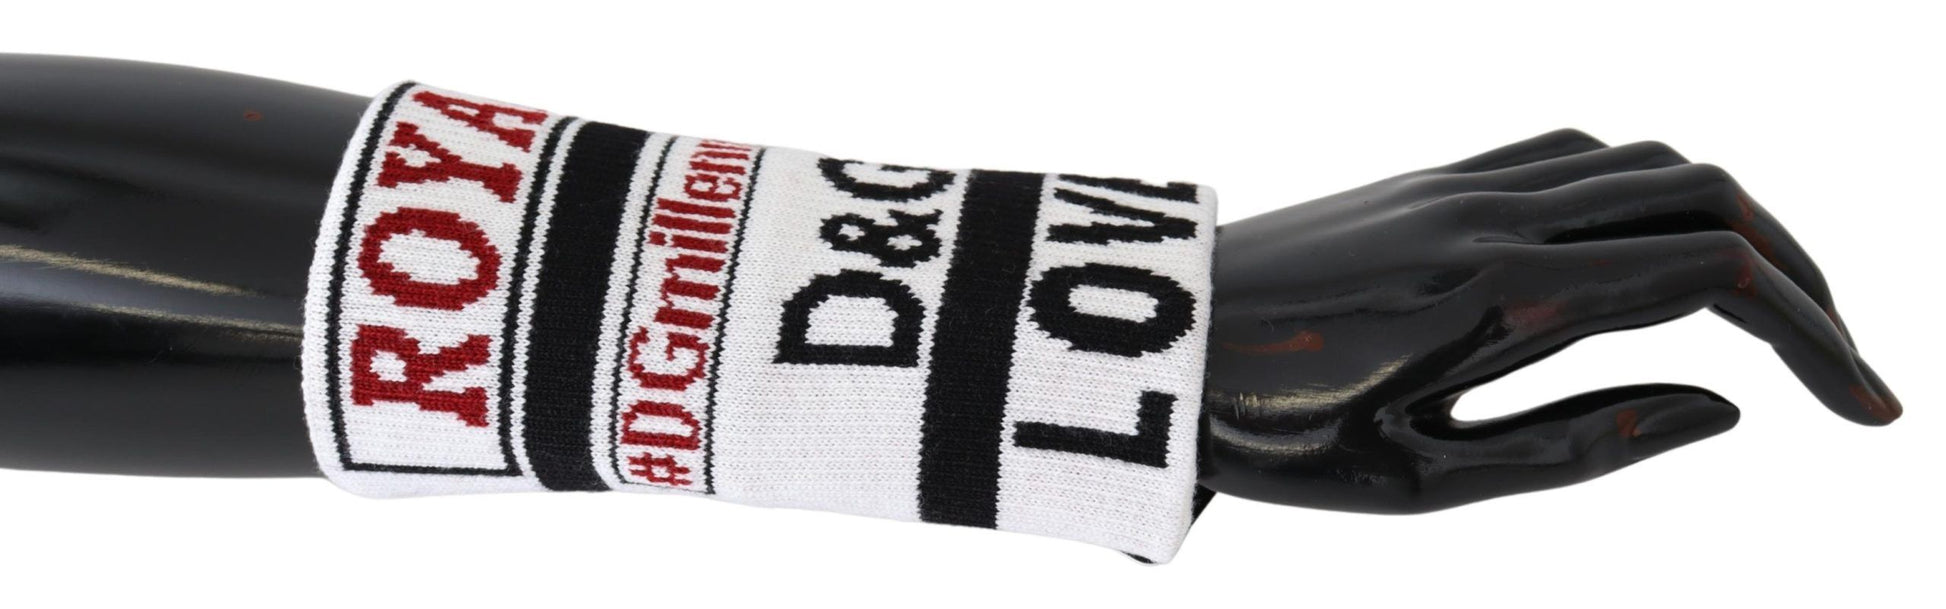 Dolce & Gabbana Multicolor Wool Knit D&G Love Wristband Wrap - Gio Beverly Hills